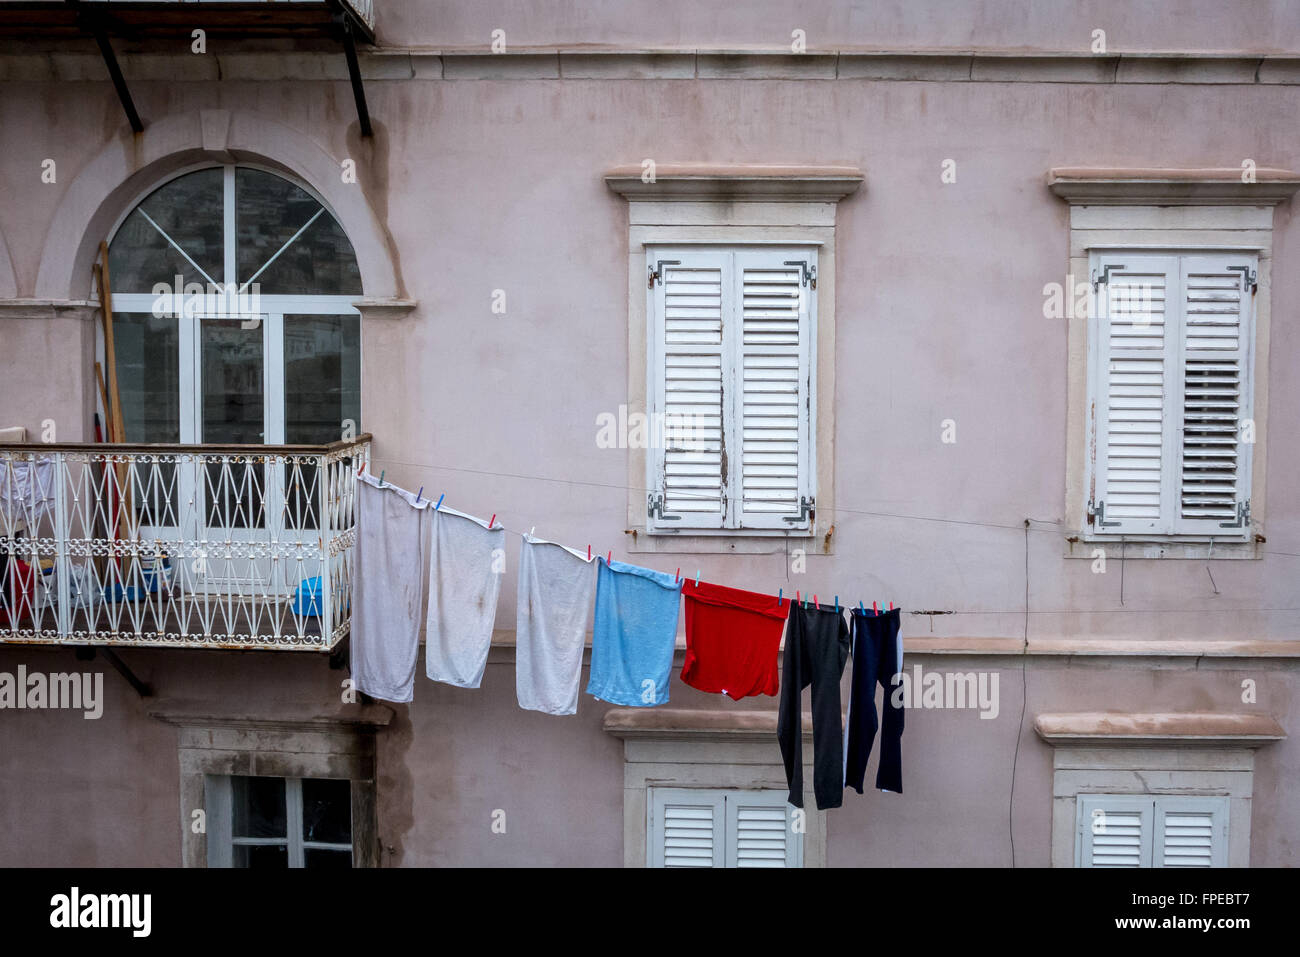 Washing hanging on a line in the old city of Dubrovnik, Croatia. Stock Photo